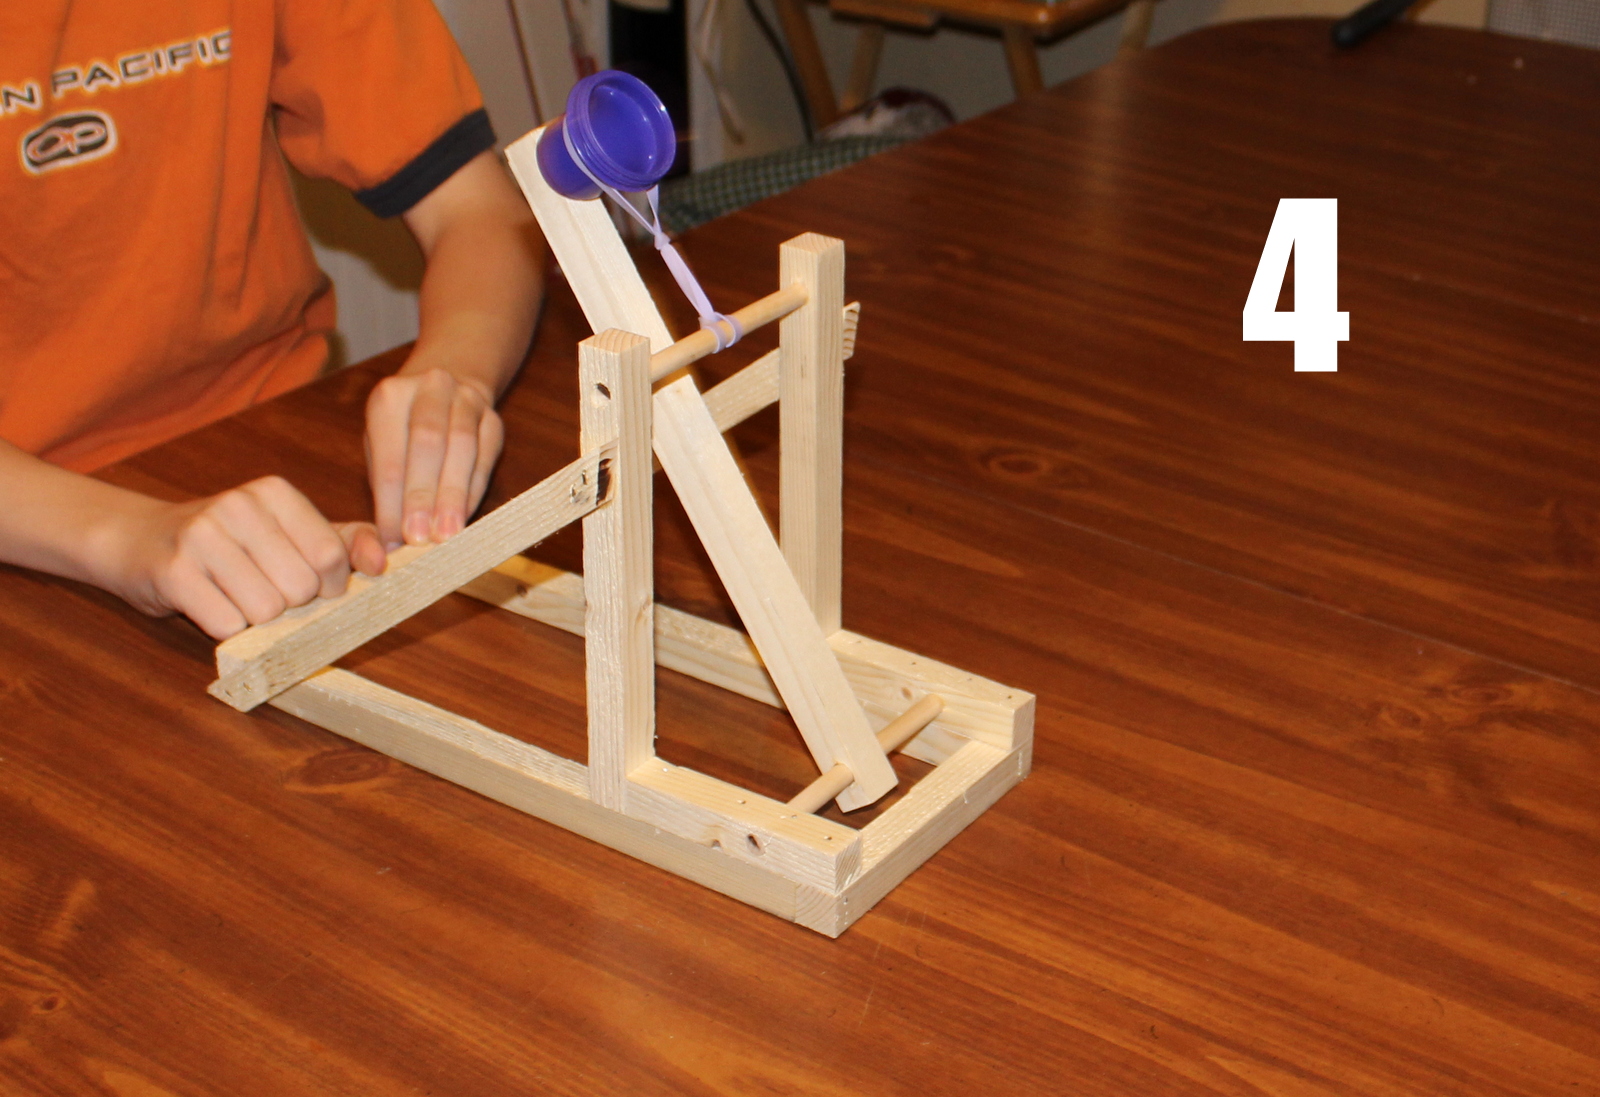 What is an idea for a school catapult project?